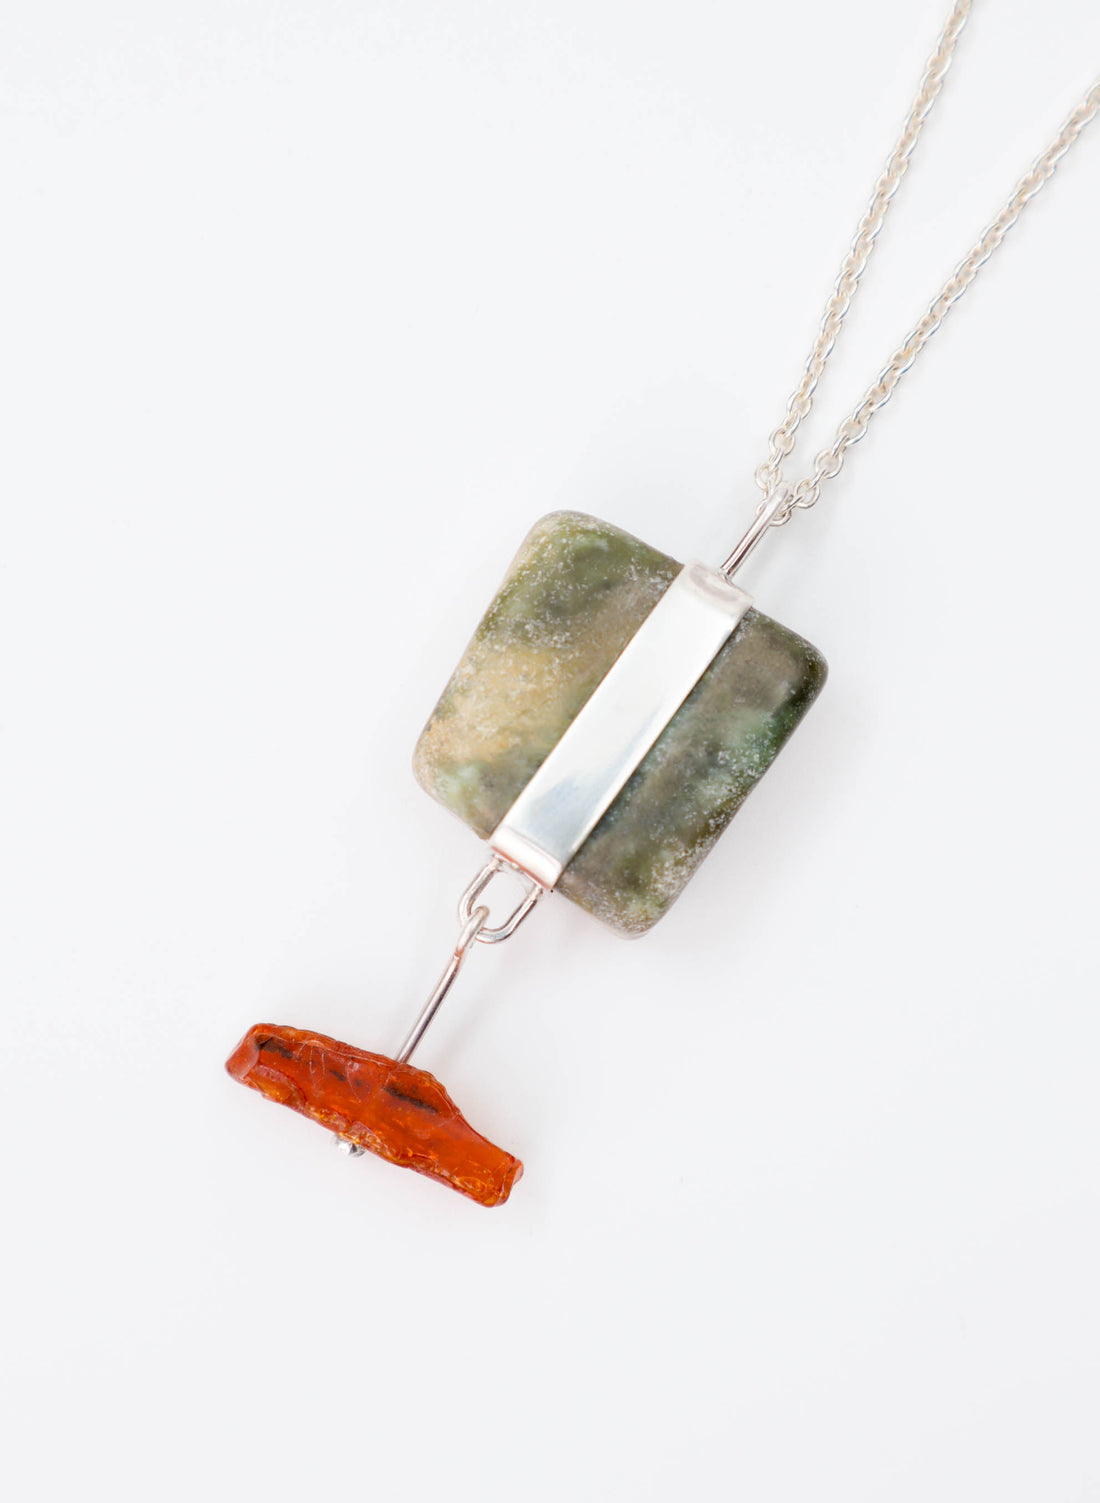 Down to Earth Pendant Necklace